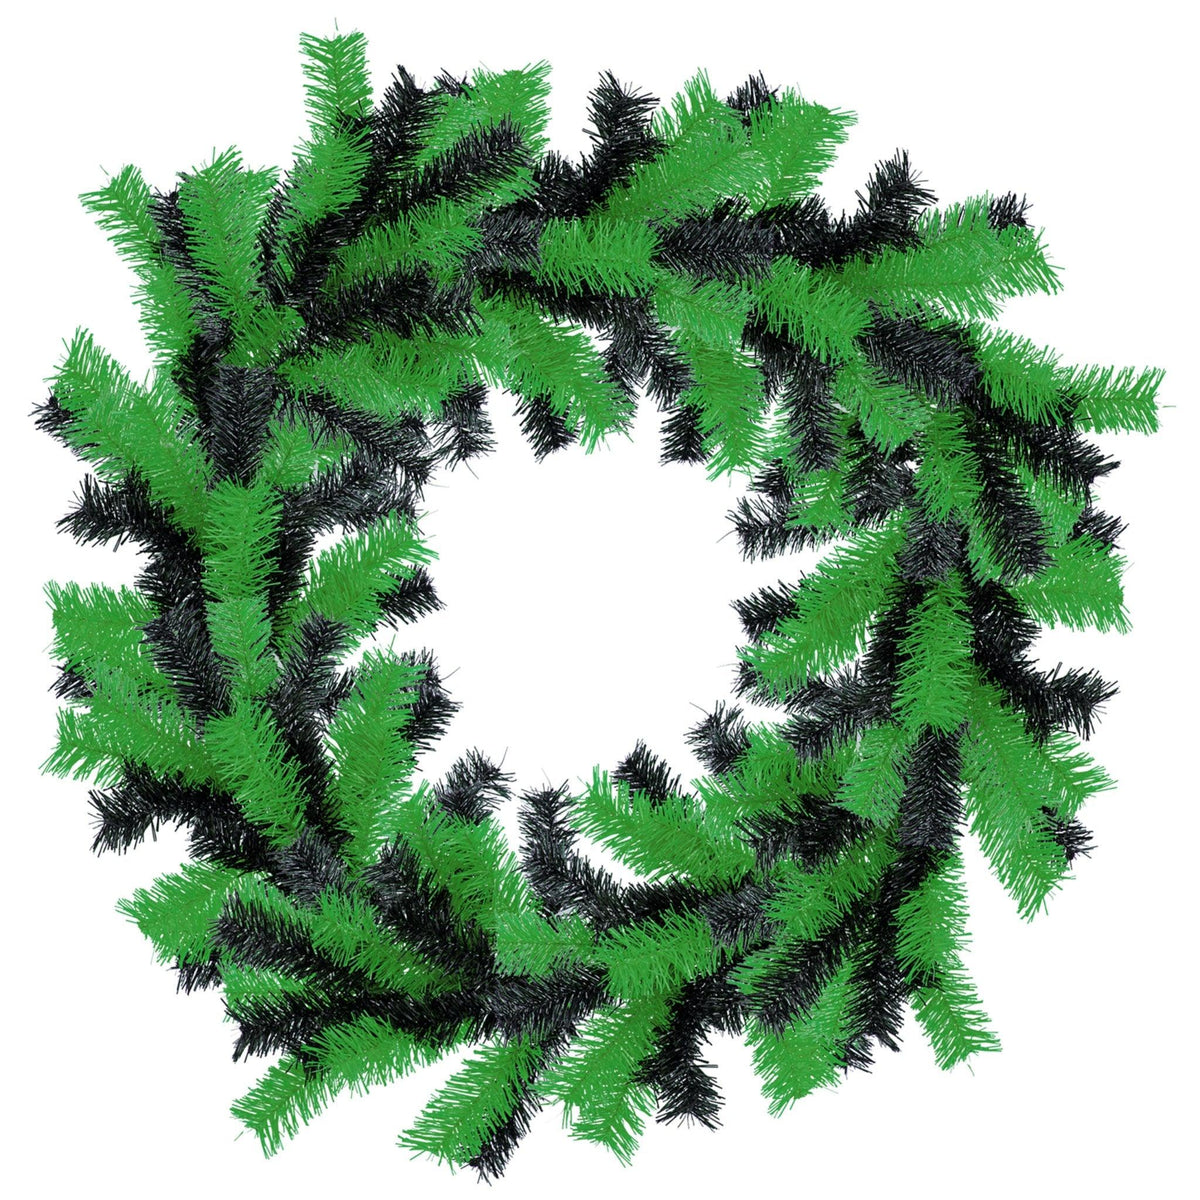 18IN Shiny Green and Black Tinsel Christmas Wreaths on sale at leedisplay.com. Decorative 18in Diameter door hanging wreaths made by Lee Display.